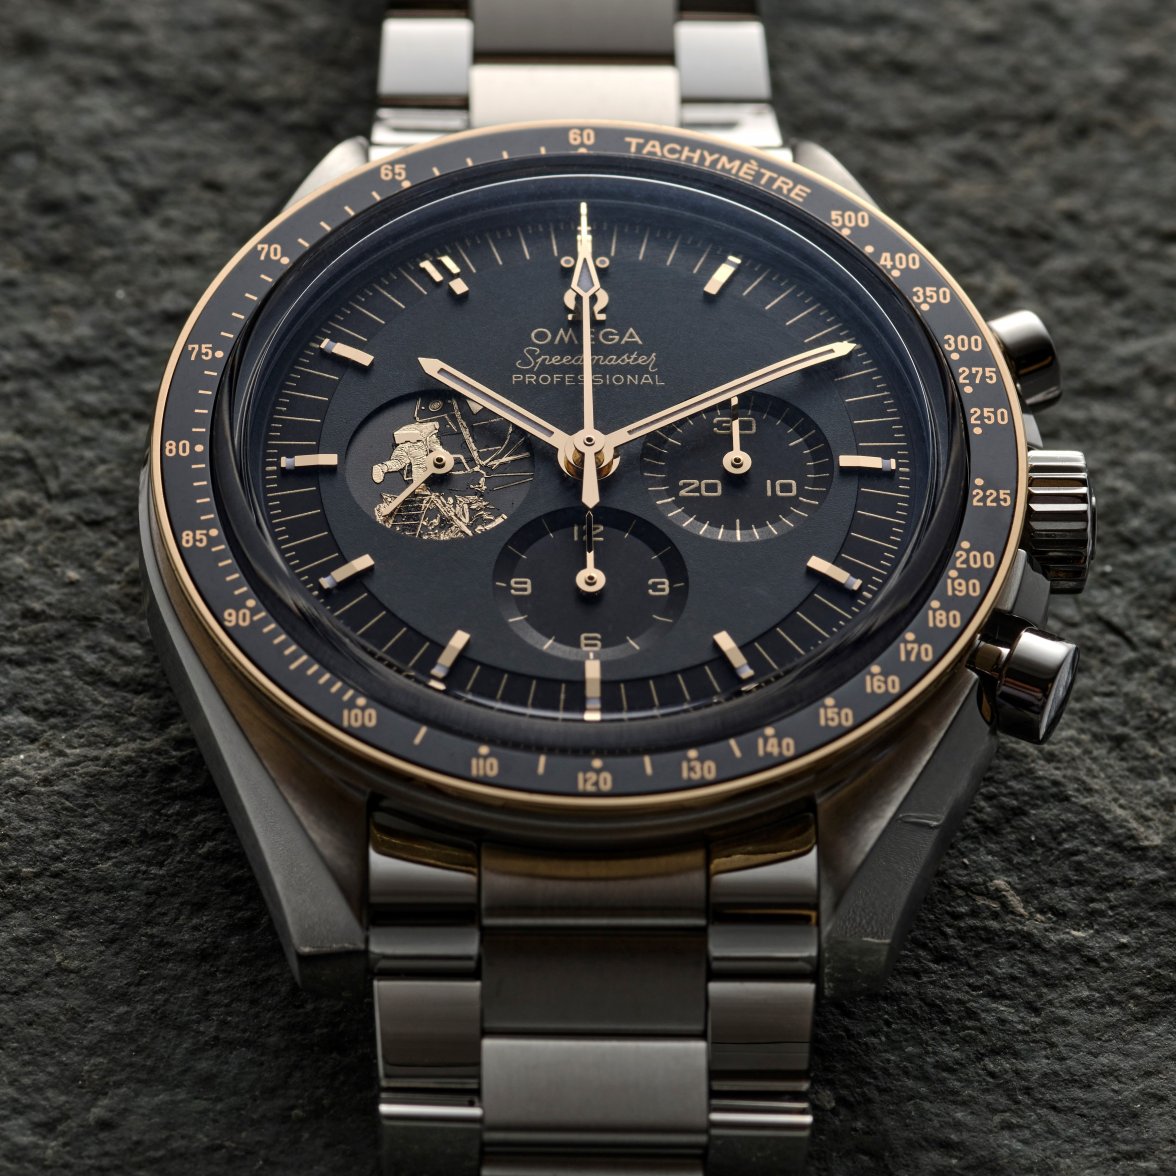 Omega Moonwatch Apollo 11 50th Anniversary | Omega Forums